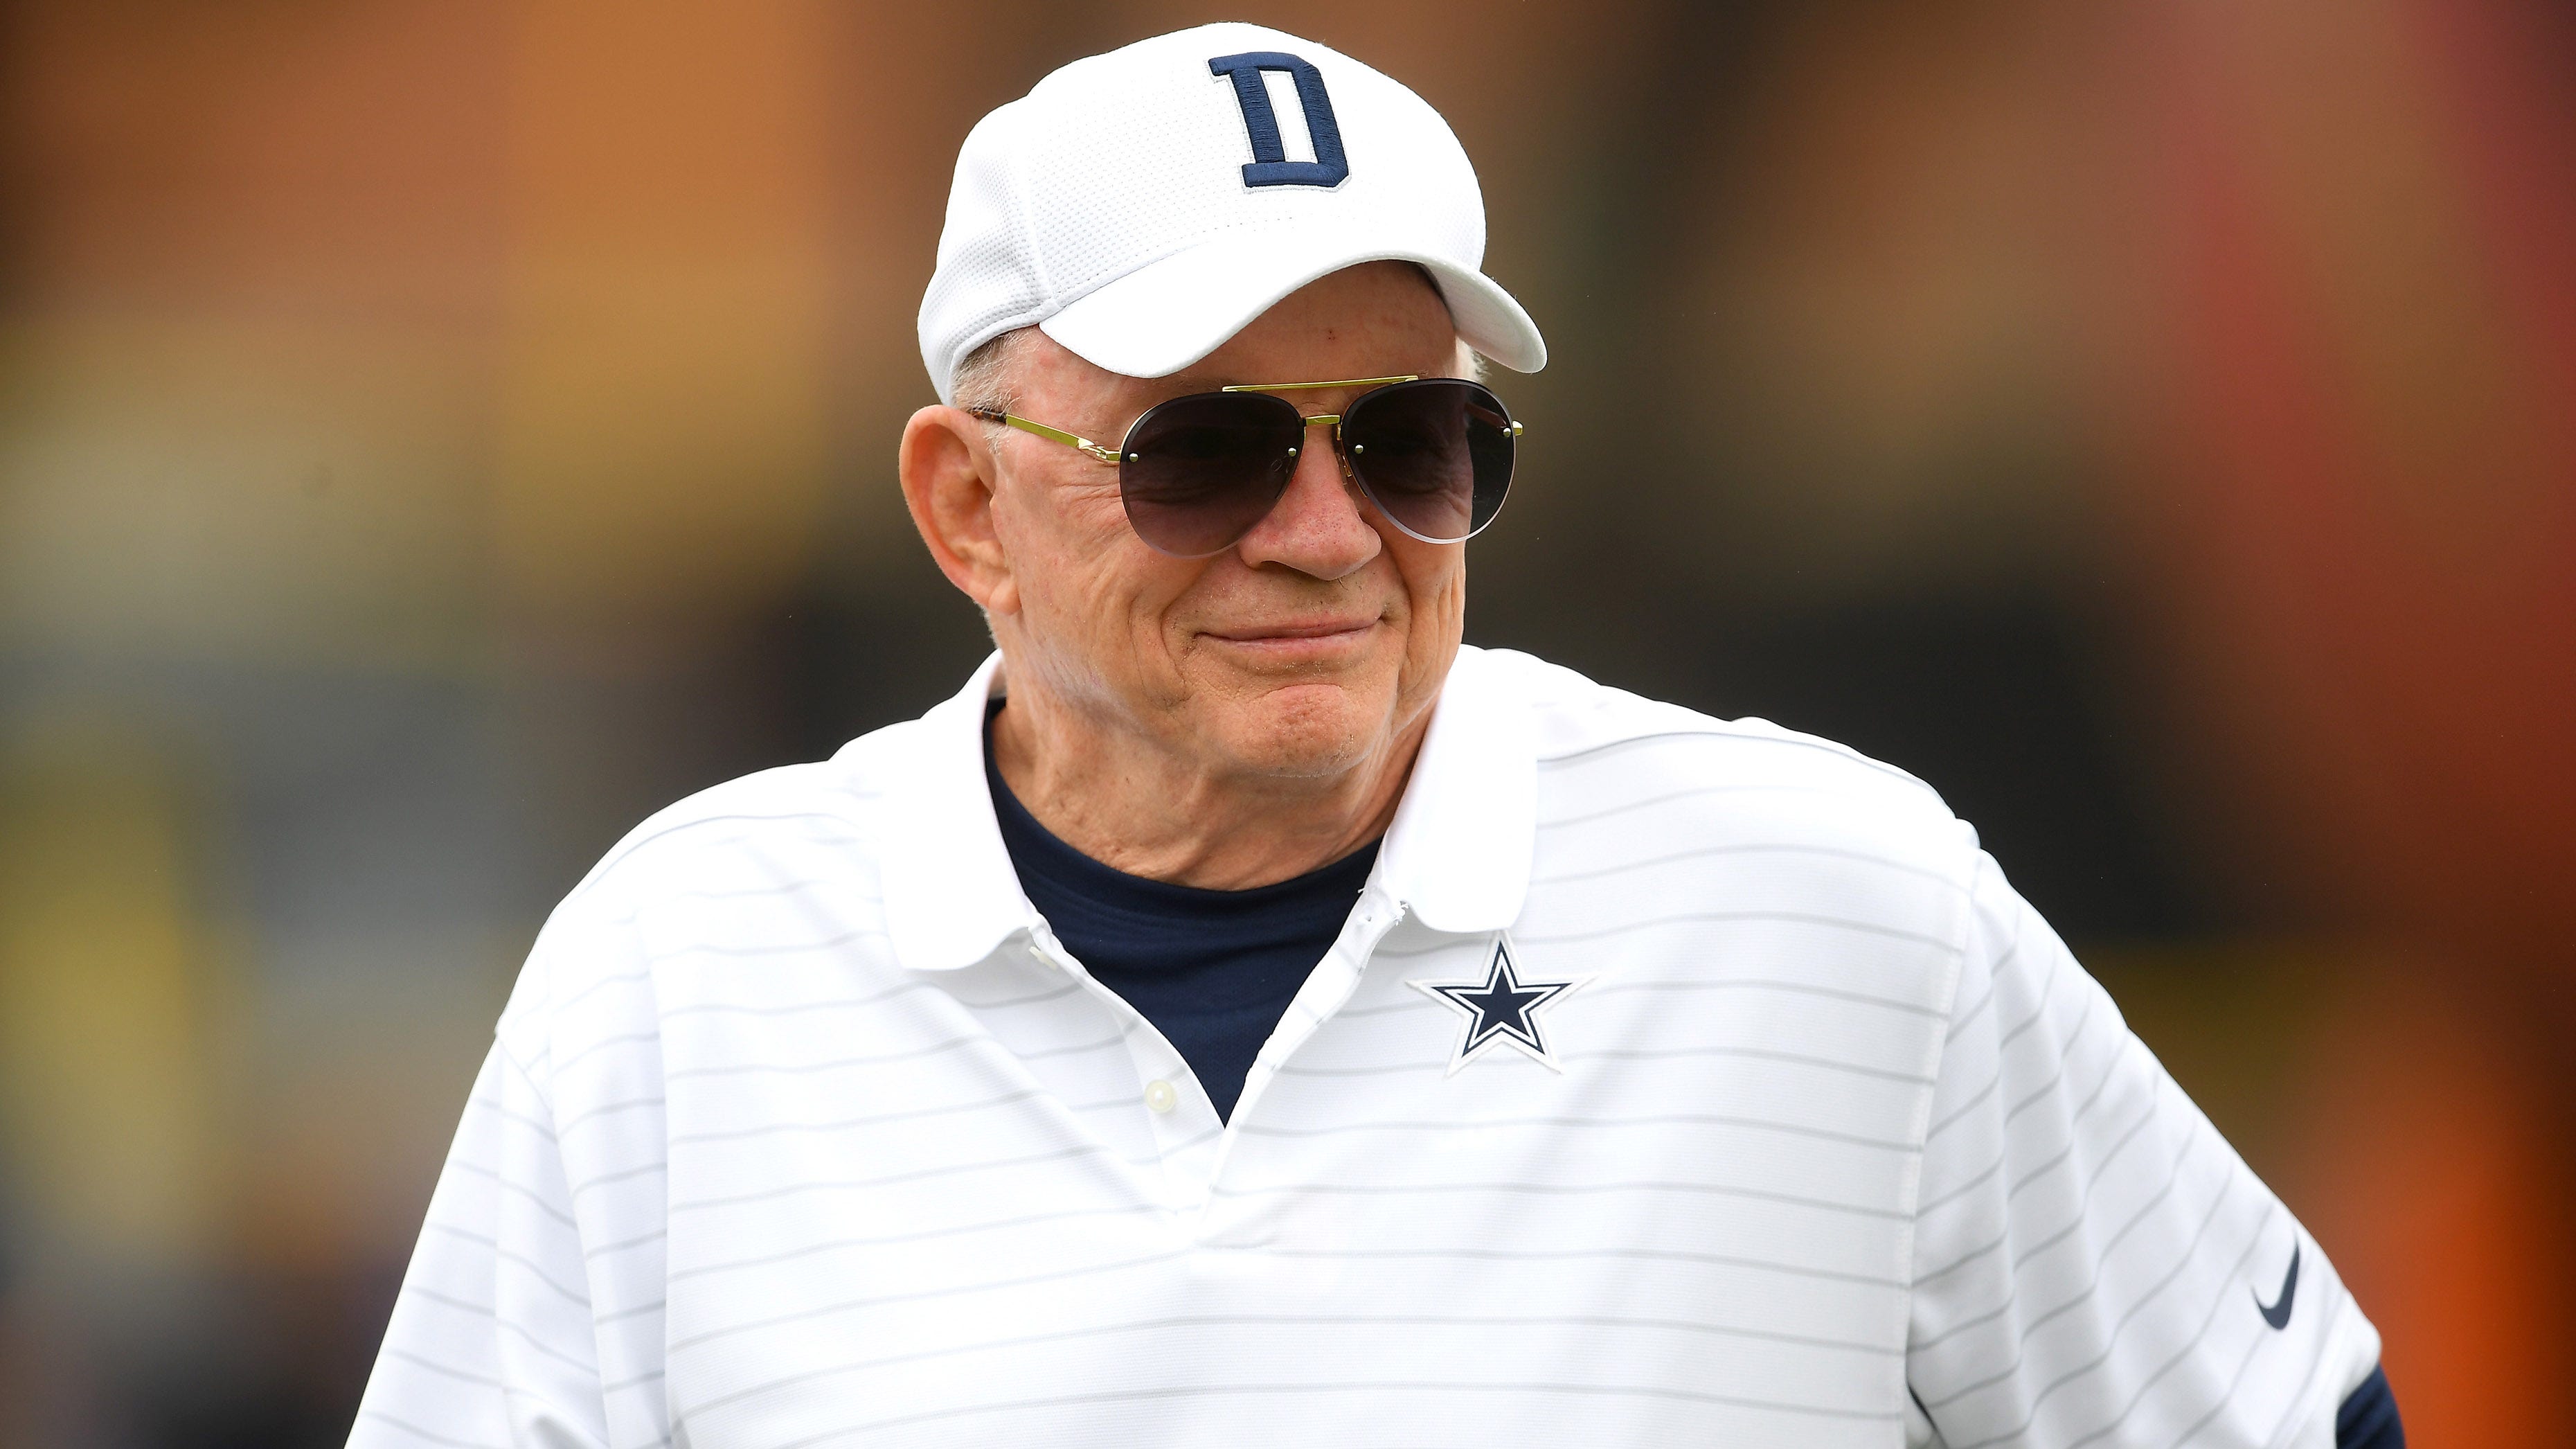 Cowboys’ Jerry Jones reacts to Jon Gruden resignation declines comment on if he should have lost Raiders job – Fox News